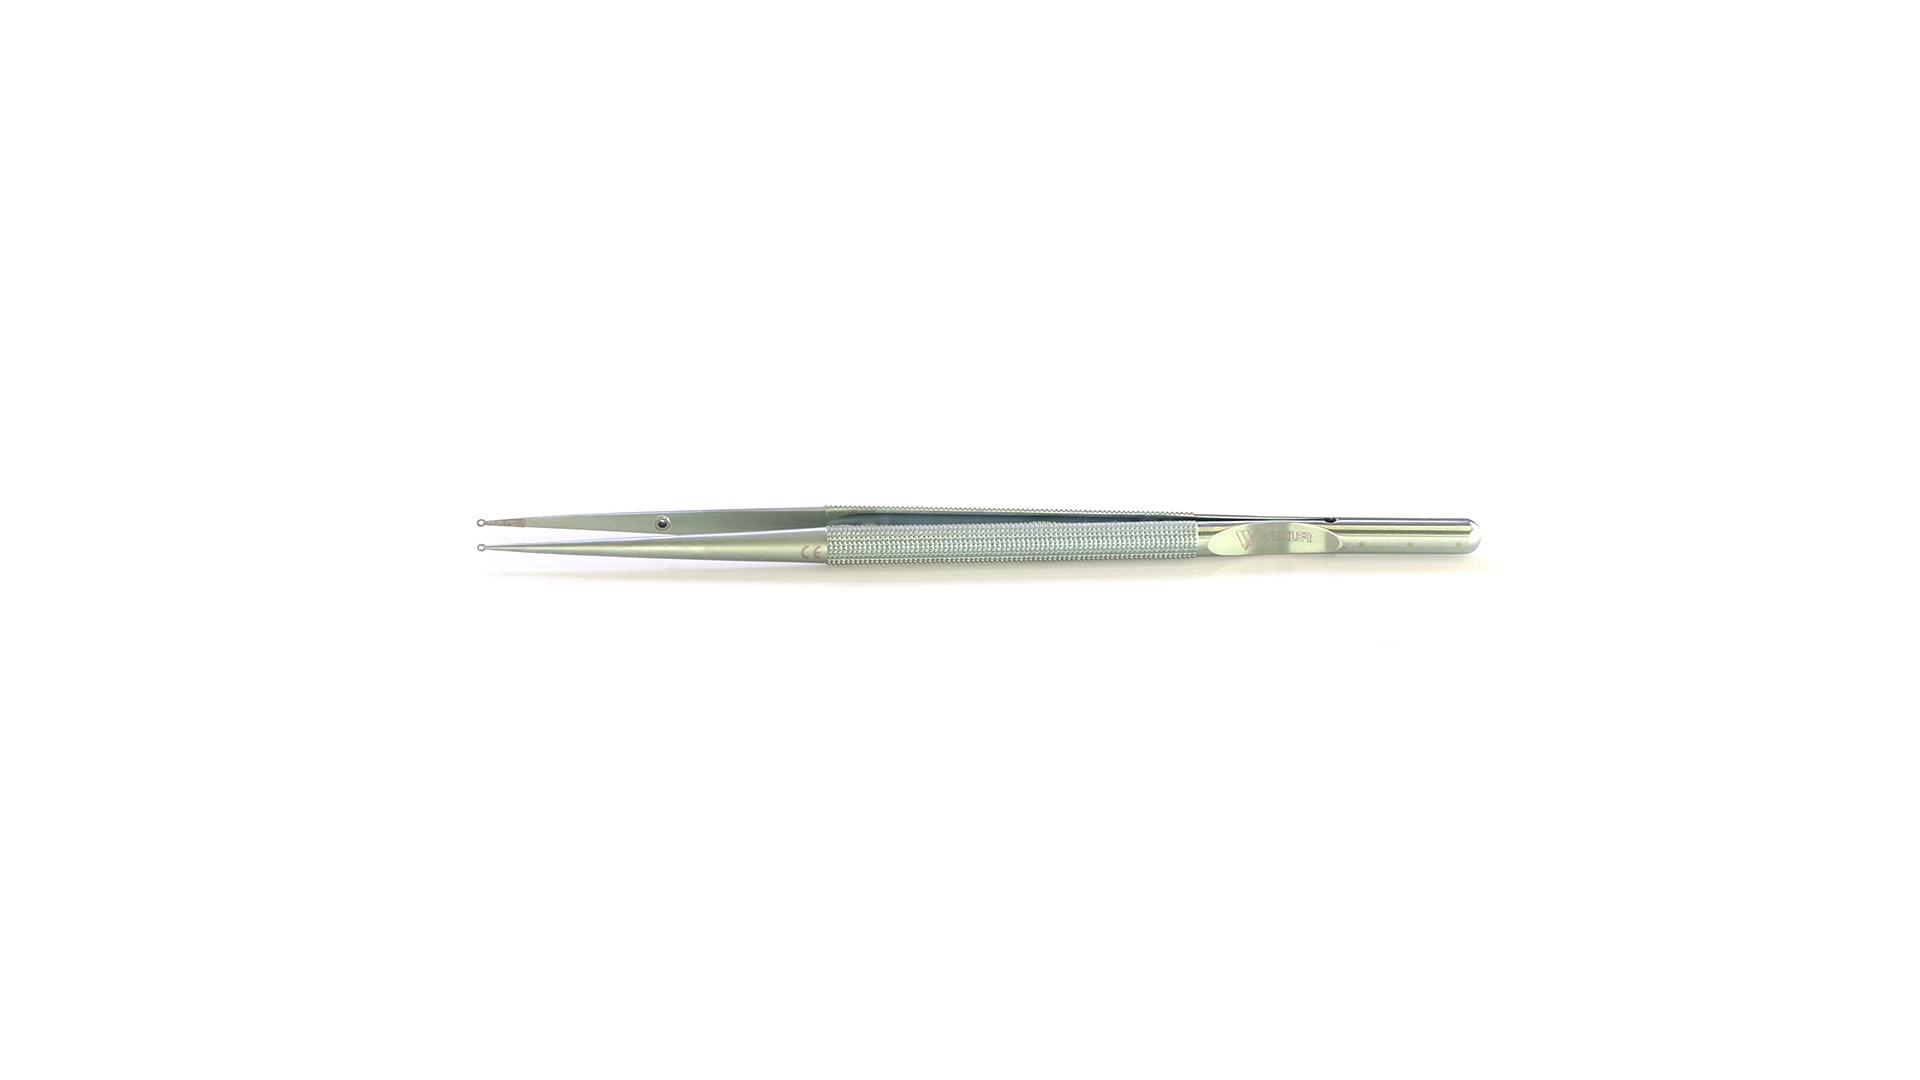 Ring tip Forceps - Straight 1.8mm rings w/TC coated platform